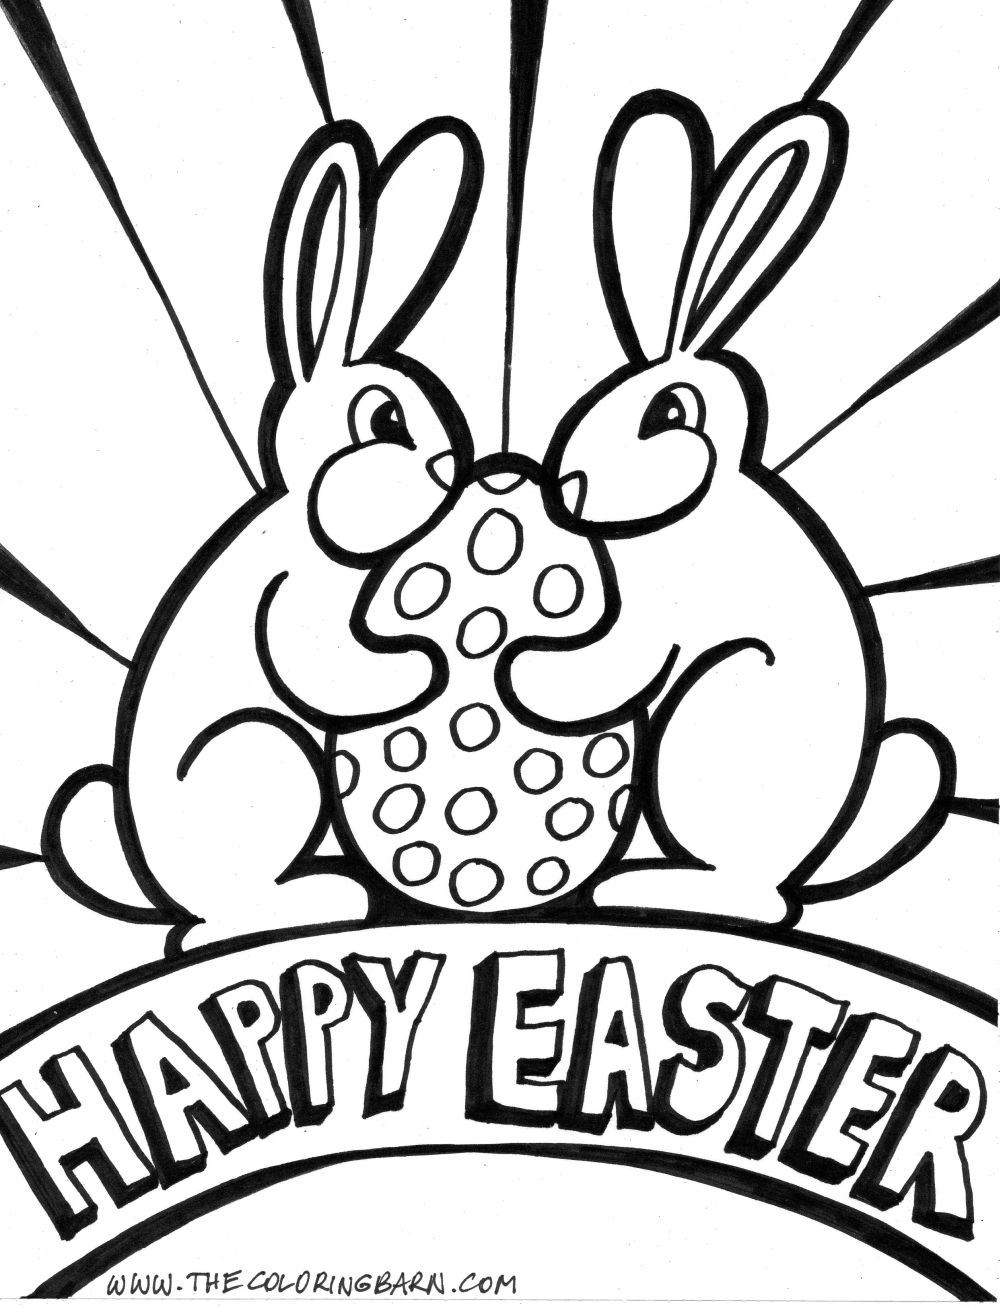 transmissionpress: 2 Rabbit Say &quotHappy Easter" Coloring Pages